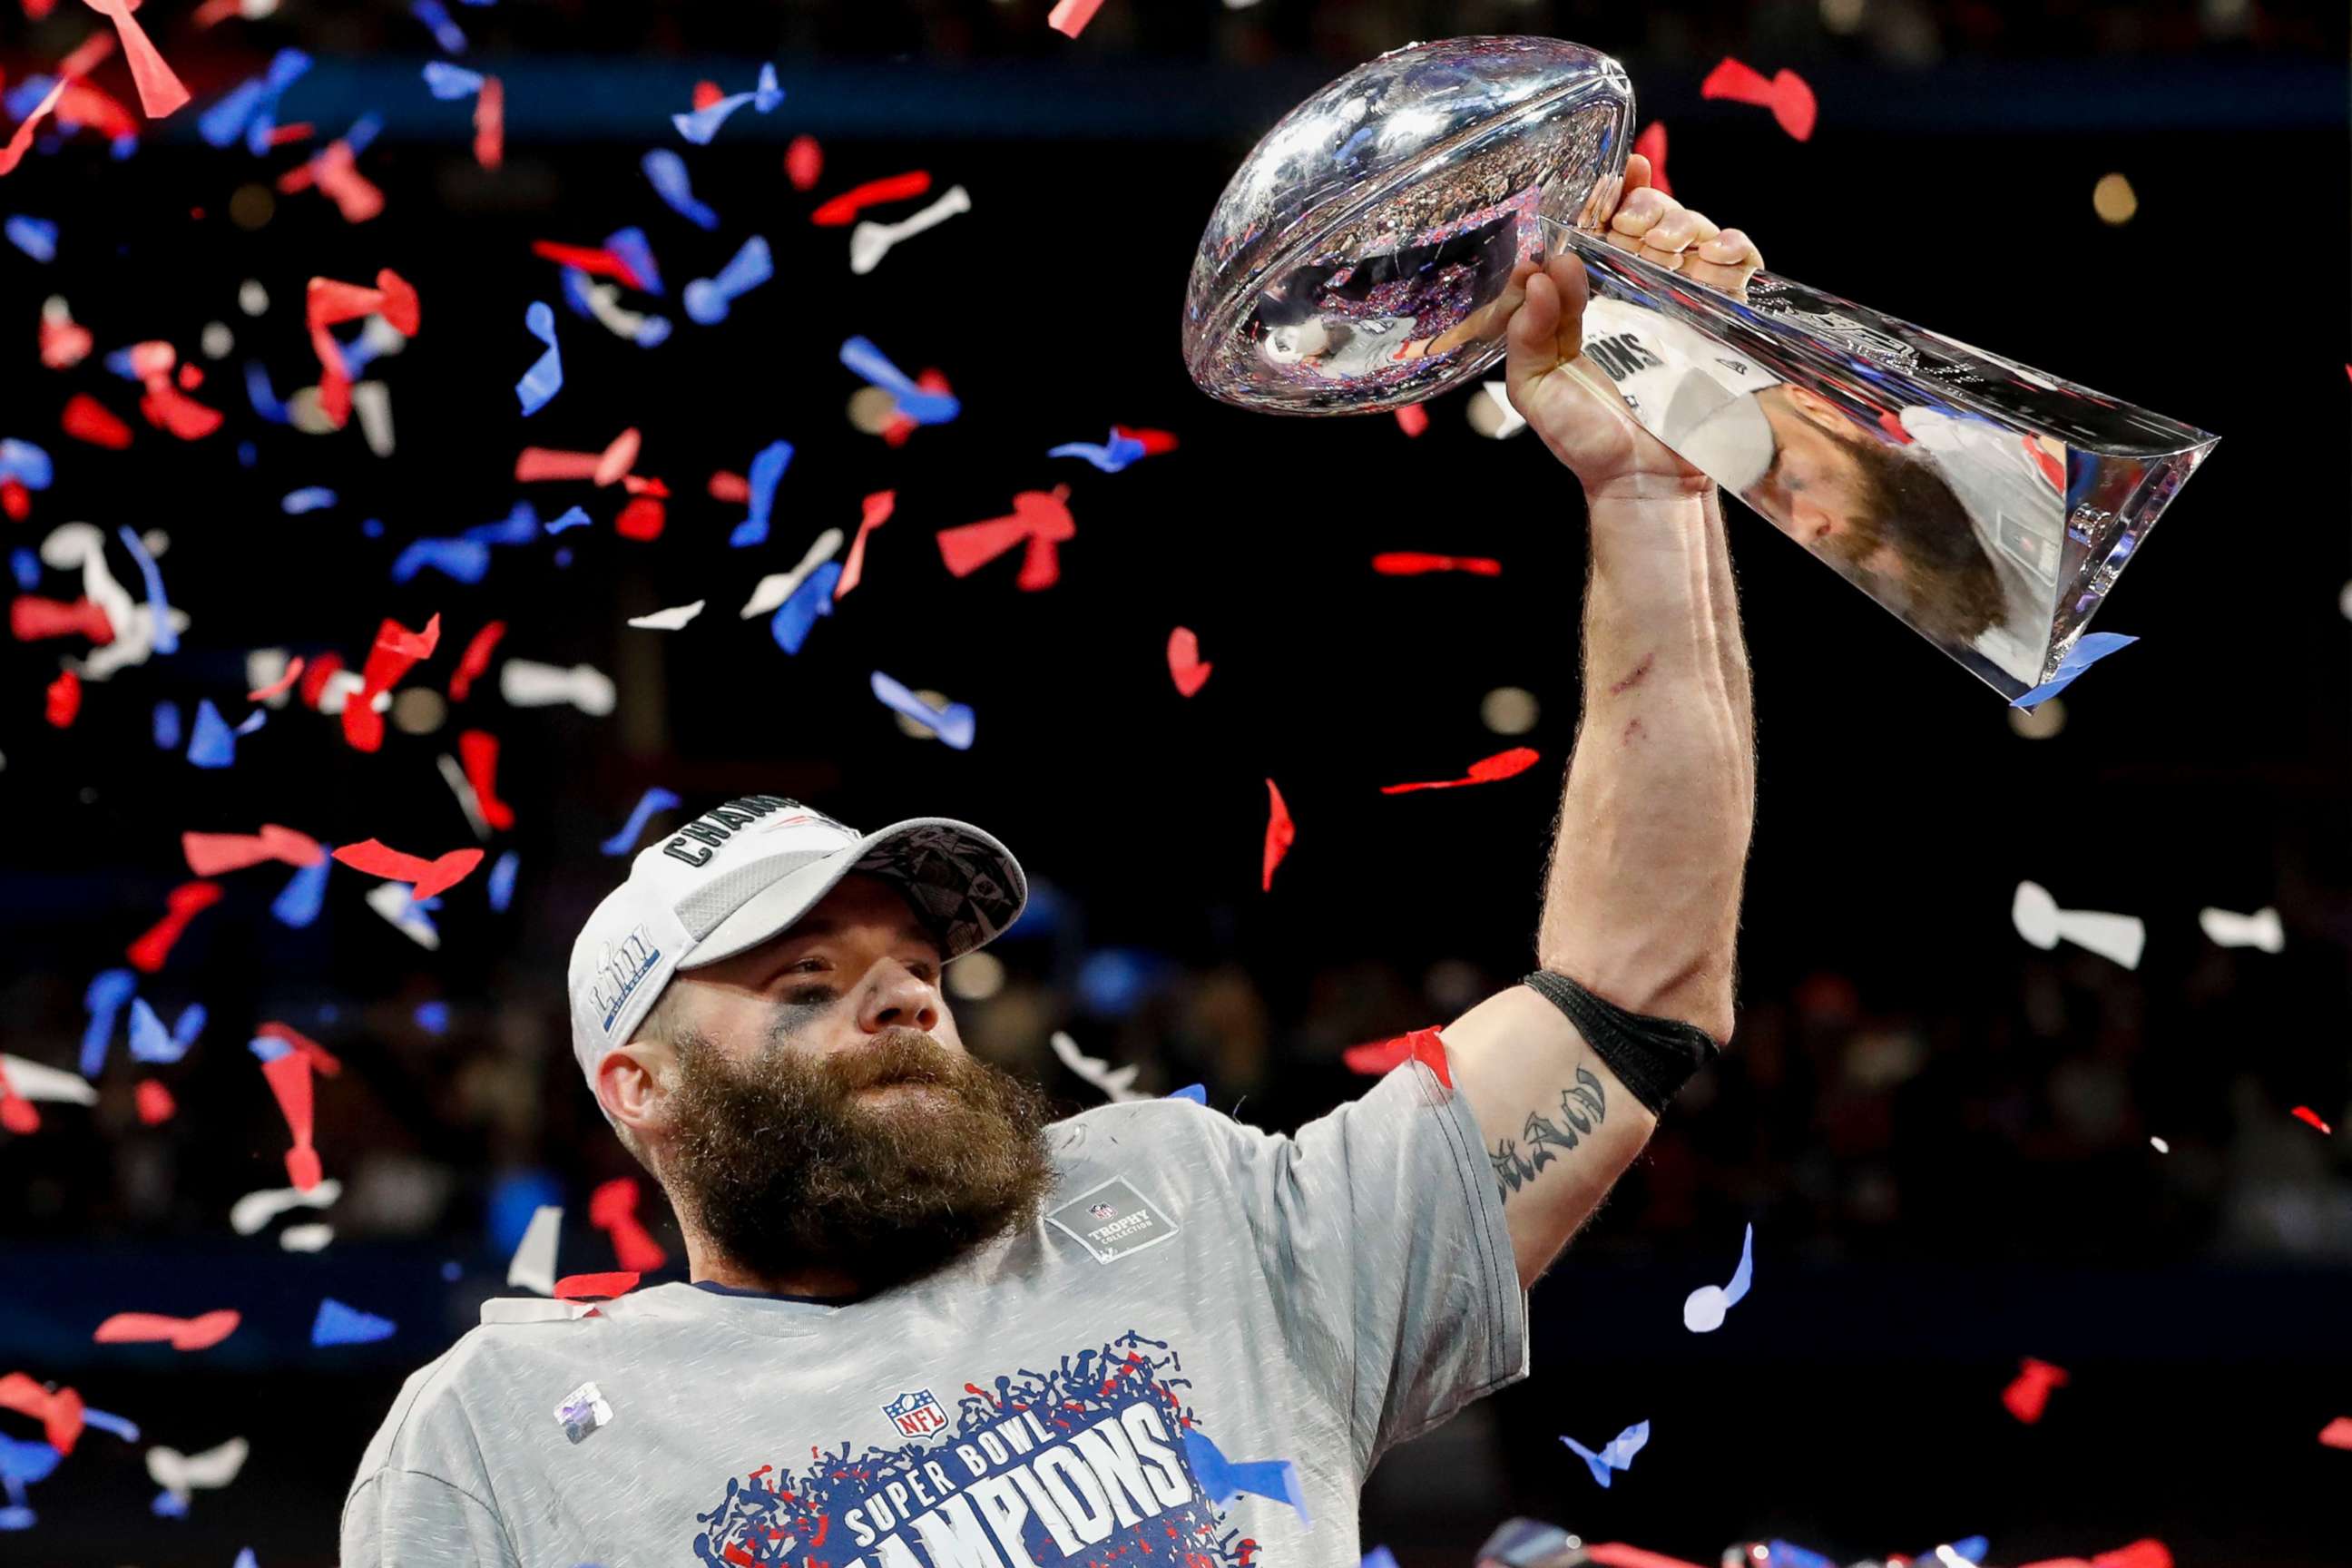 PHOTO: Super Bowl LIII MVP New England Patriots wide receiver Julian Edelman holds the Vince Lombardi Trophy after Super Bowl LIII between the New England Patriots and the Los Angeles Rams at Mercedes-Benz Stadium in Atlanta, Feb. 3, 2019.